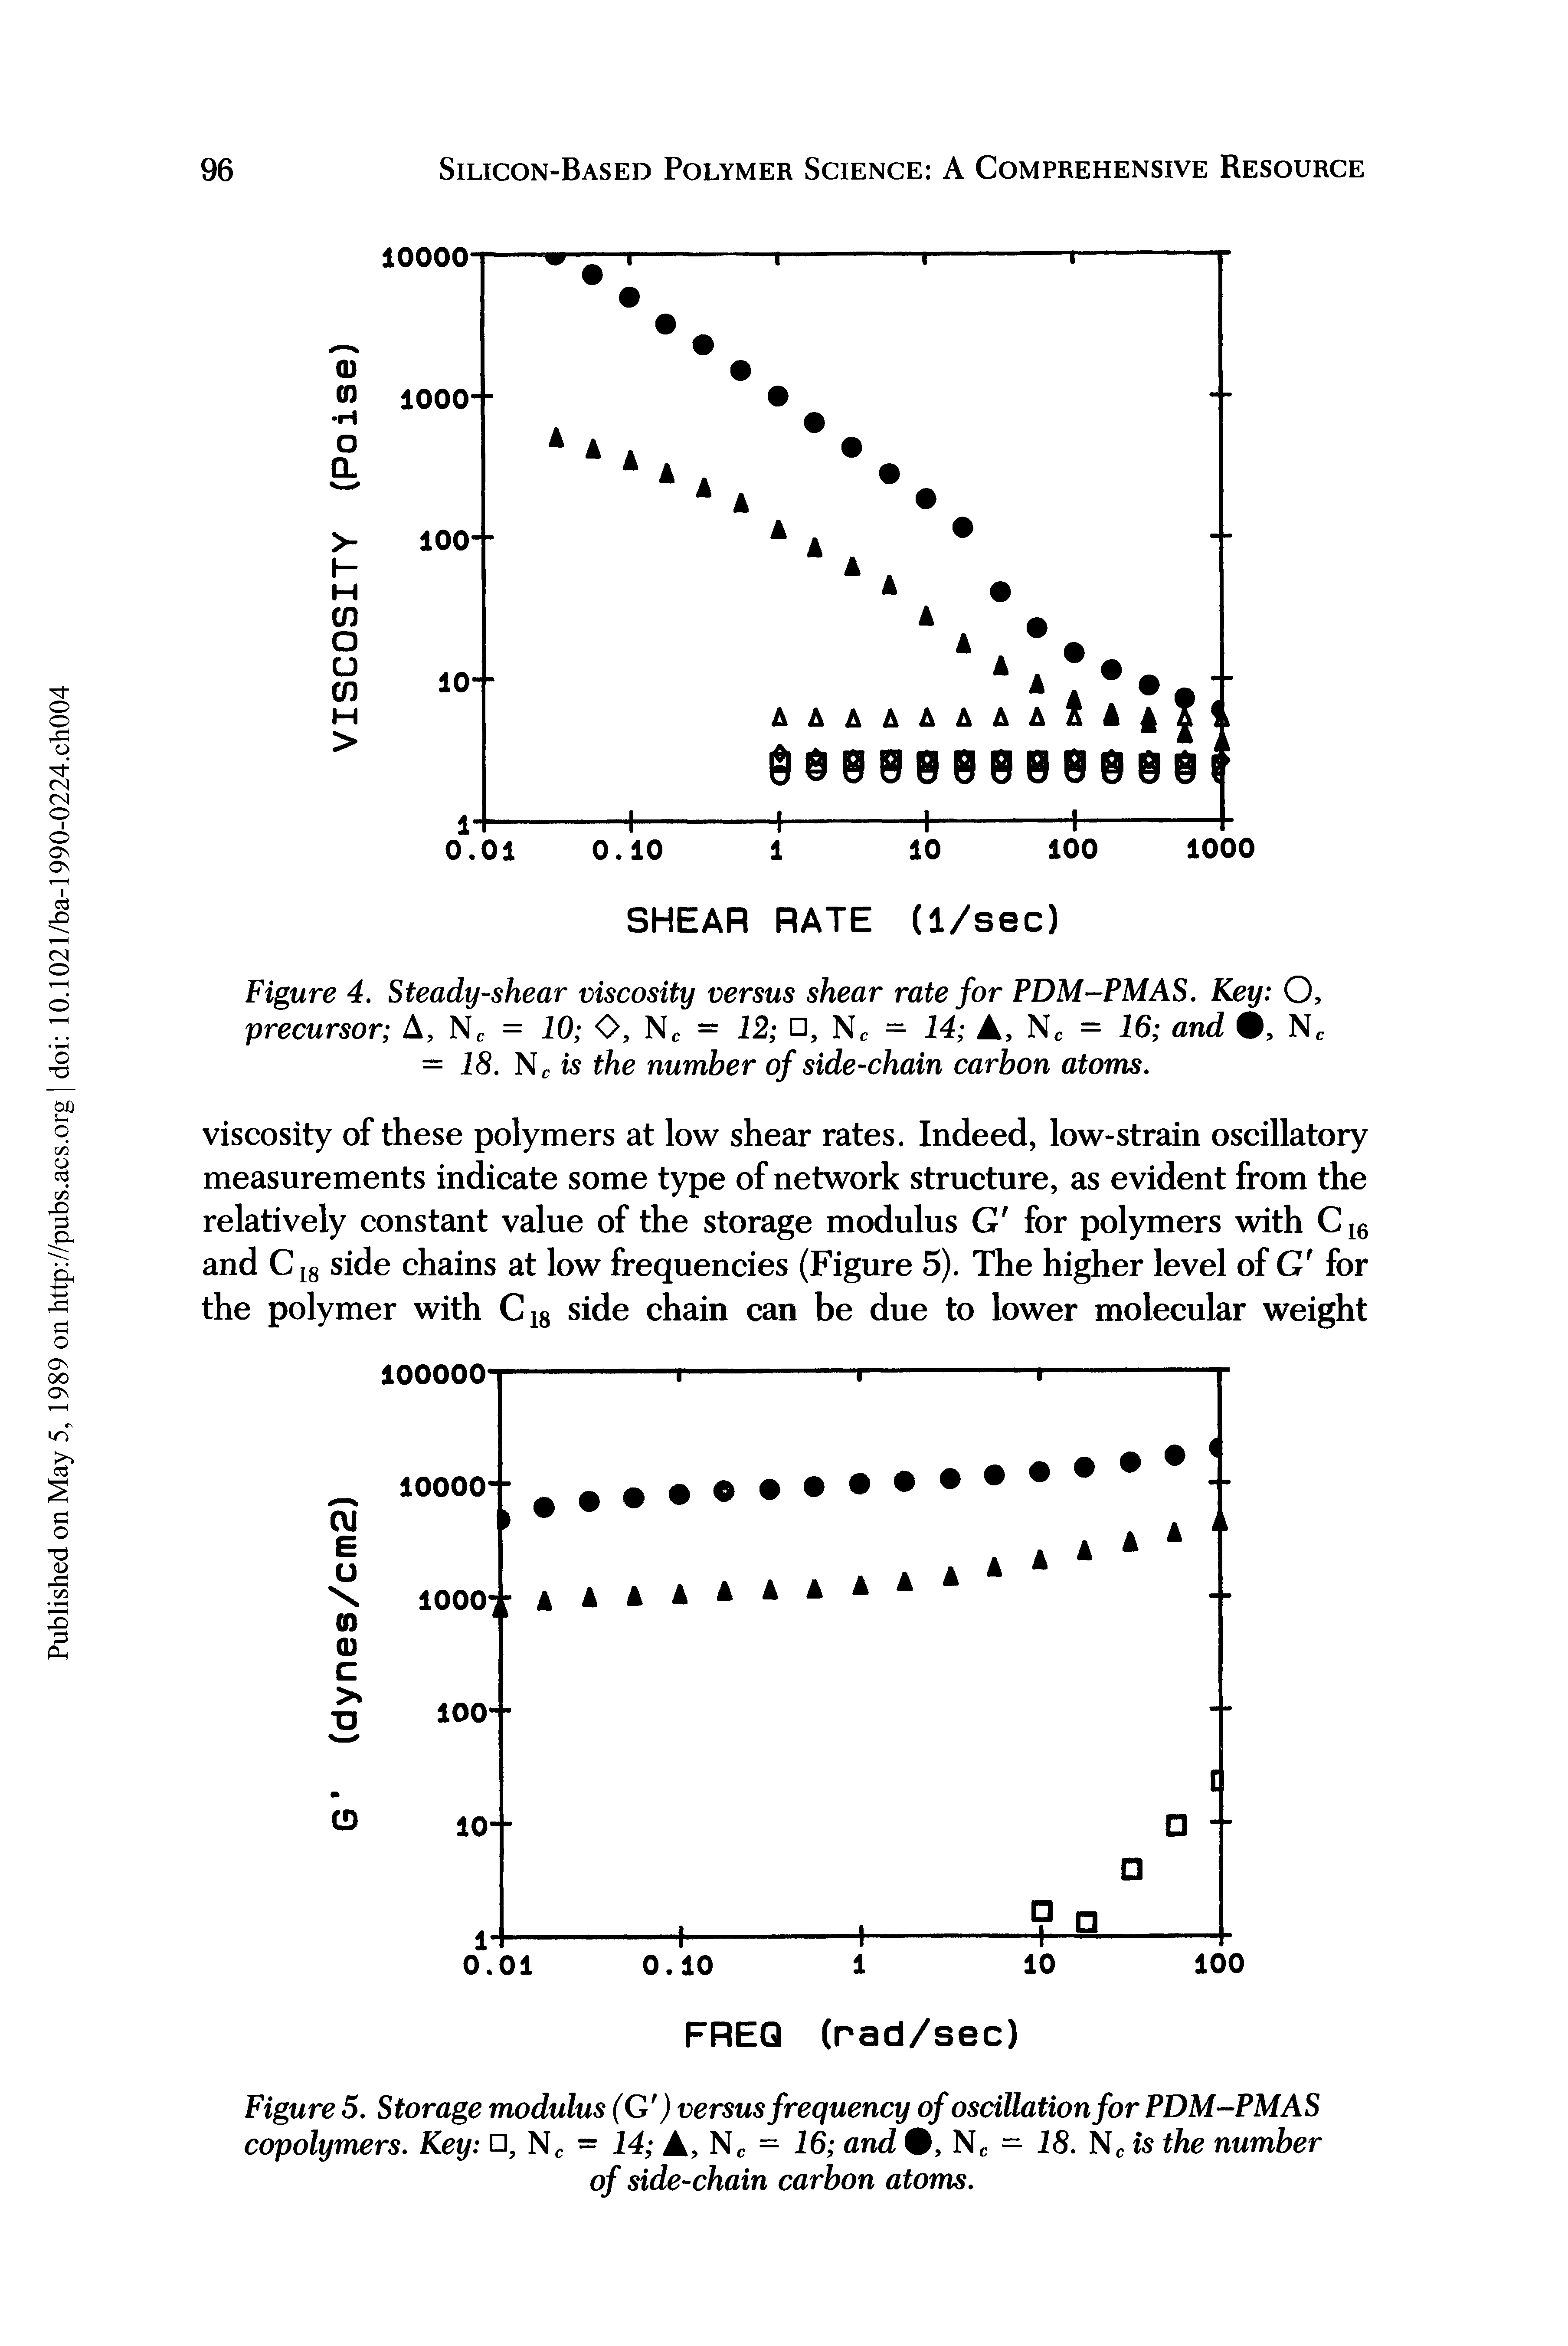 Figure 4, Steady-shear viscosity versus shear rate for PDM-PMAS. Key O, precursor A, Nc = 10 O, = 12 , Nc = 14 A, Nc = 16 and 9, Nc = 18. Nc is the number of side-chain carbon atoms.